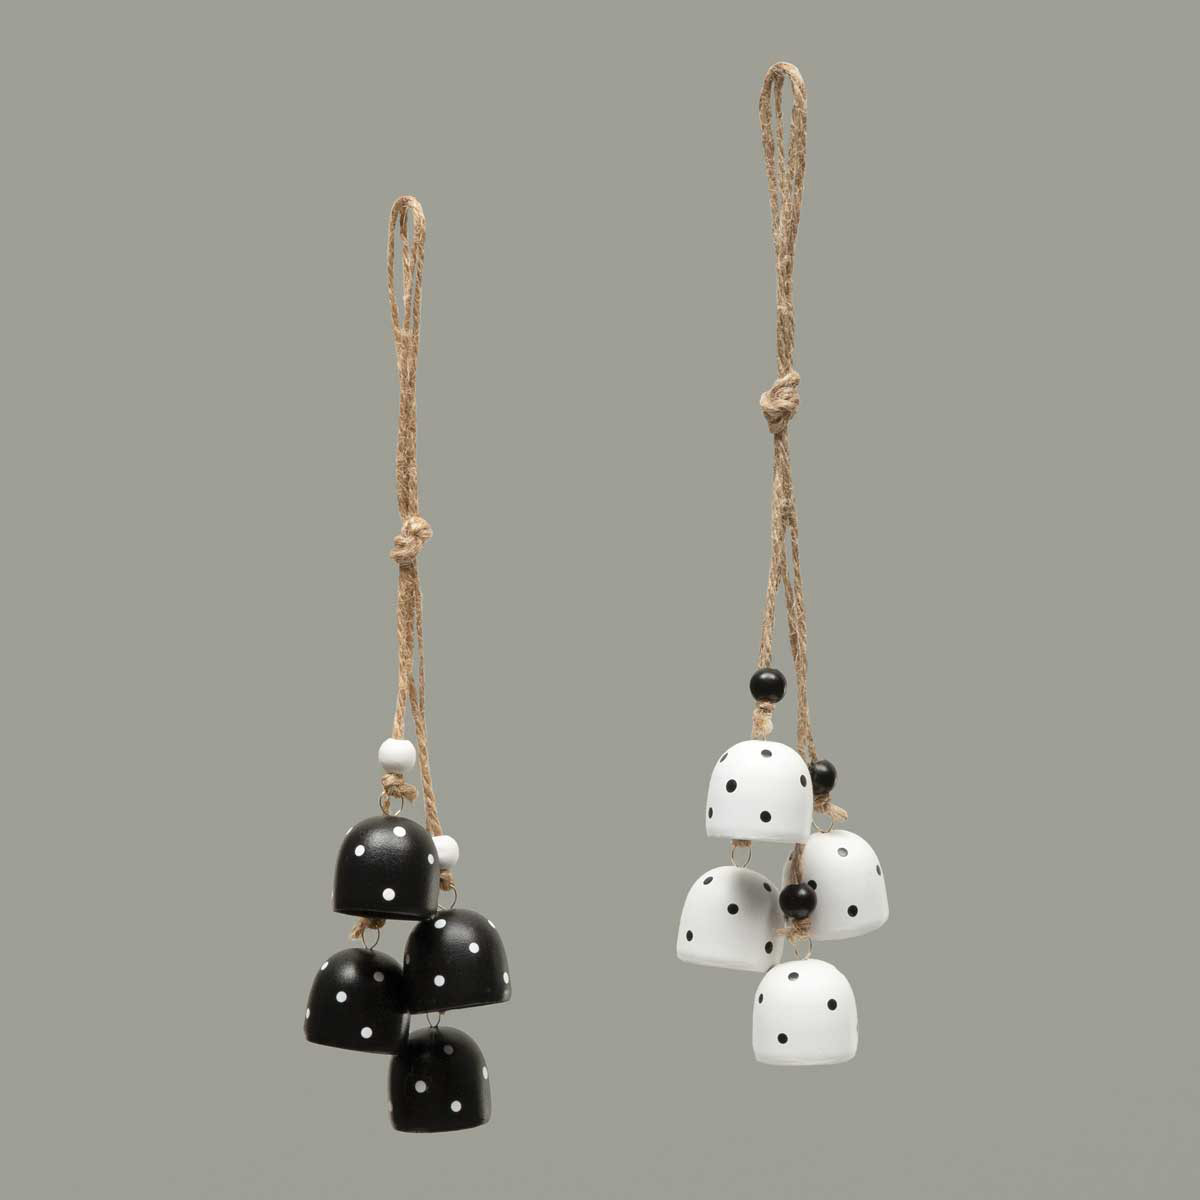 ORNAMENT HANG BELLS 2 ASSORTED 2IN X 11IN BLACK/WHITE METAL - Click Image to Close